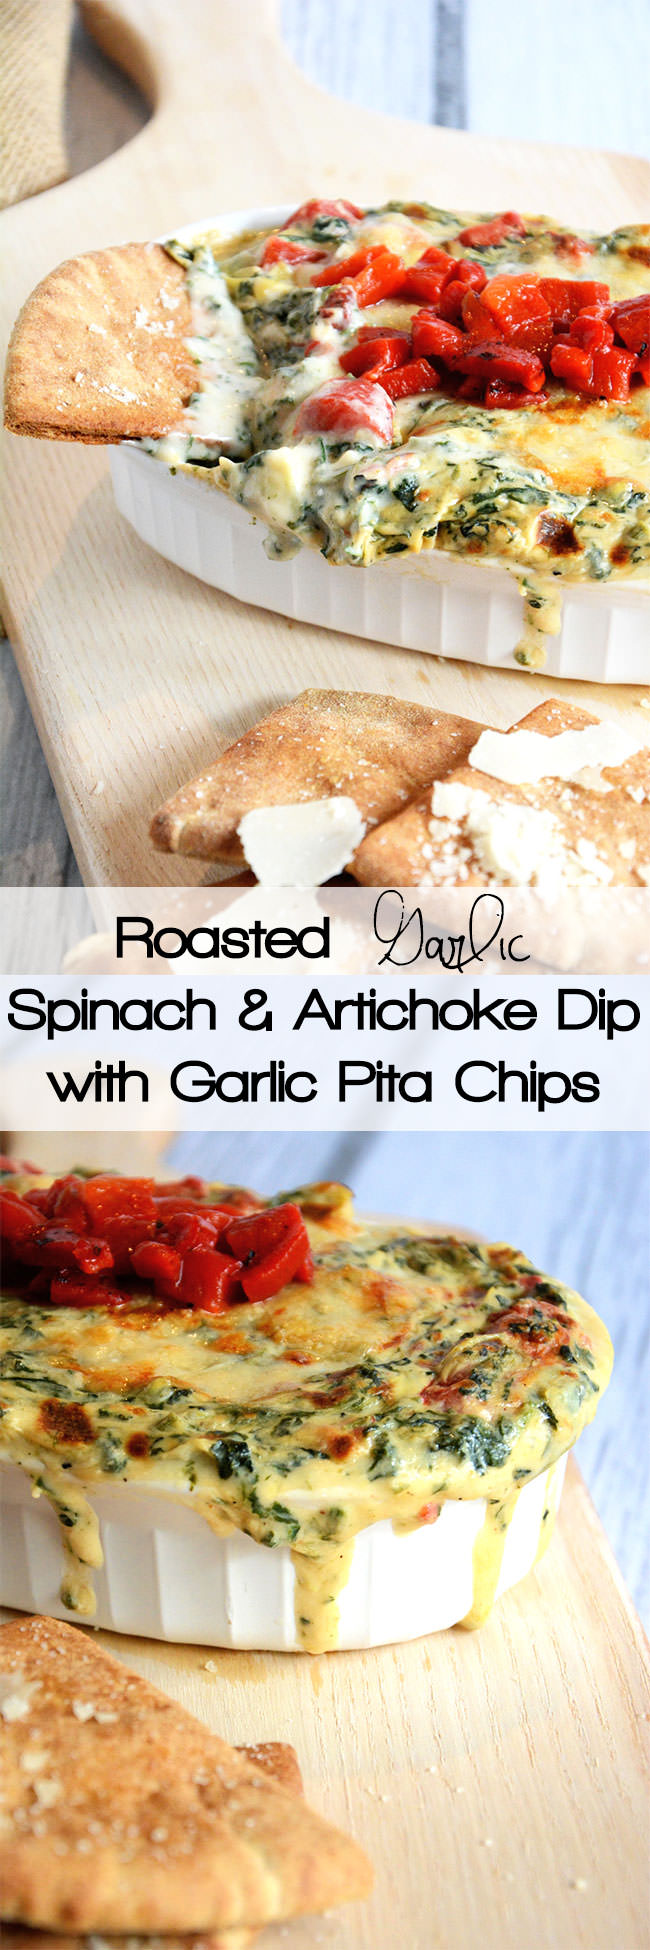 A skinny version of the classic Spinach & Artichoke Dip with roasted garlic and red peppers!